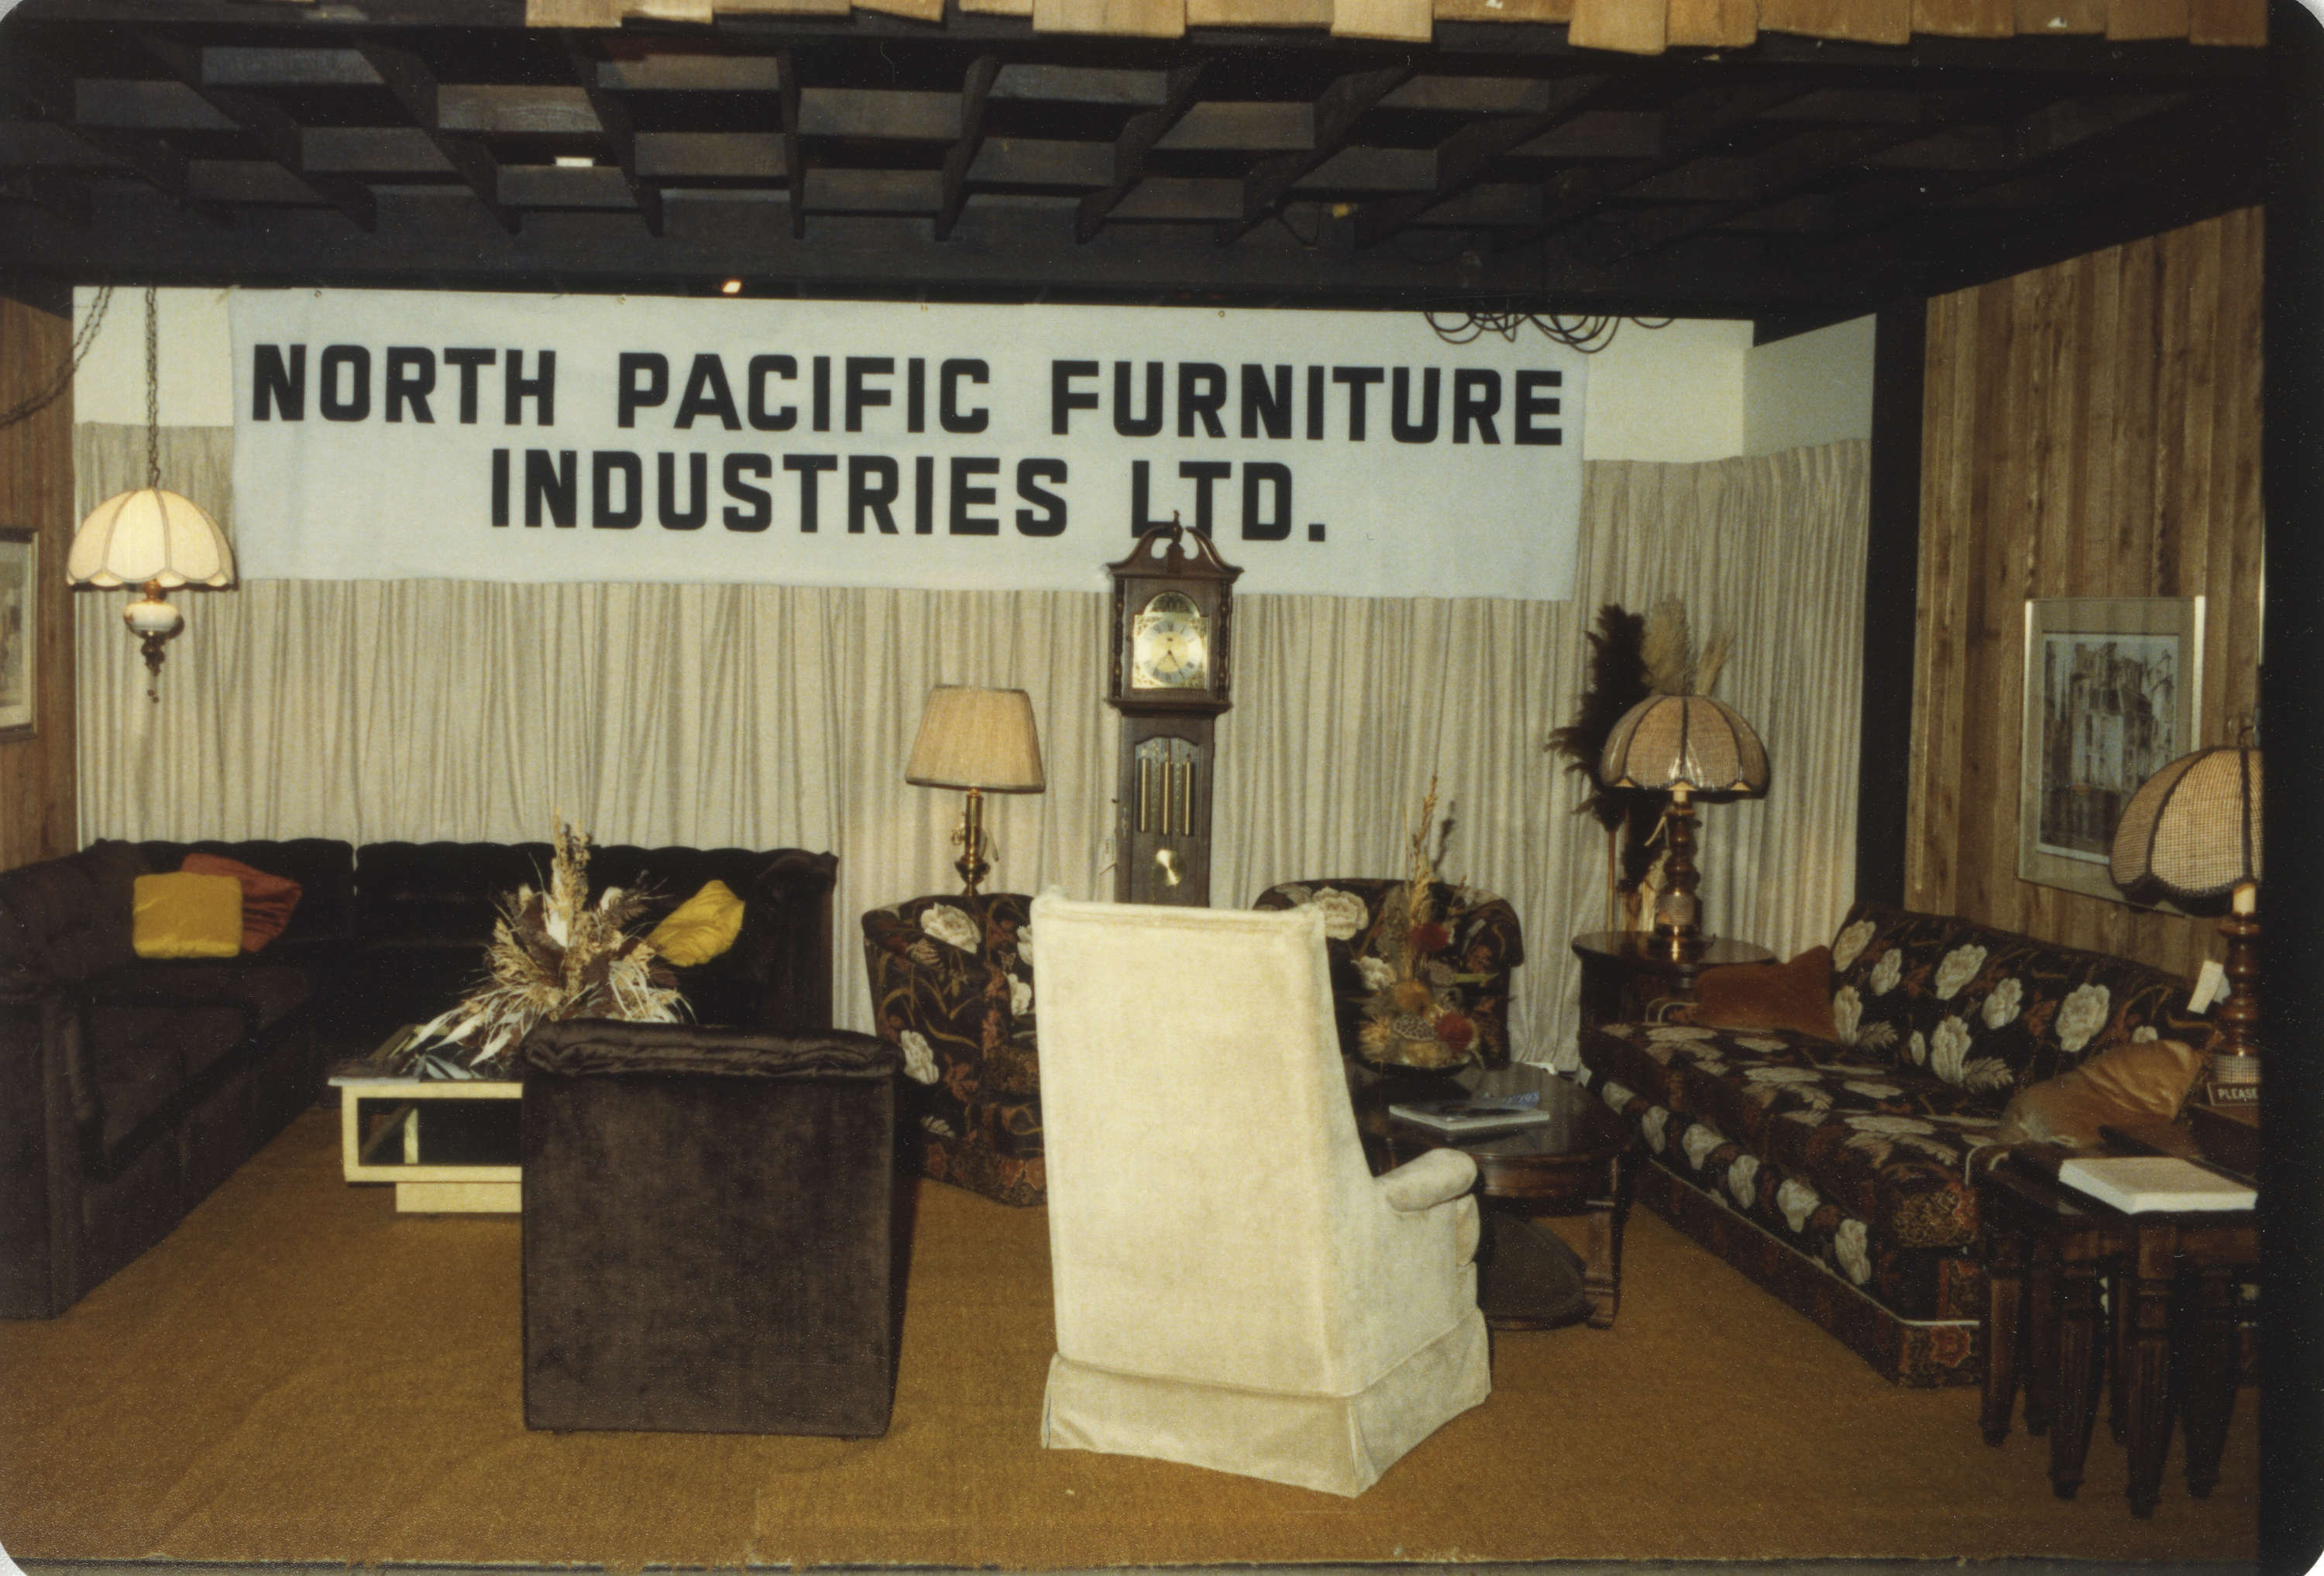 North Pacific Furniture Industries Ltd Display Booth City Of